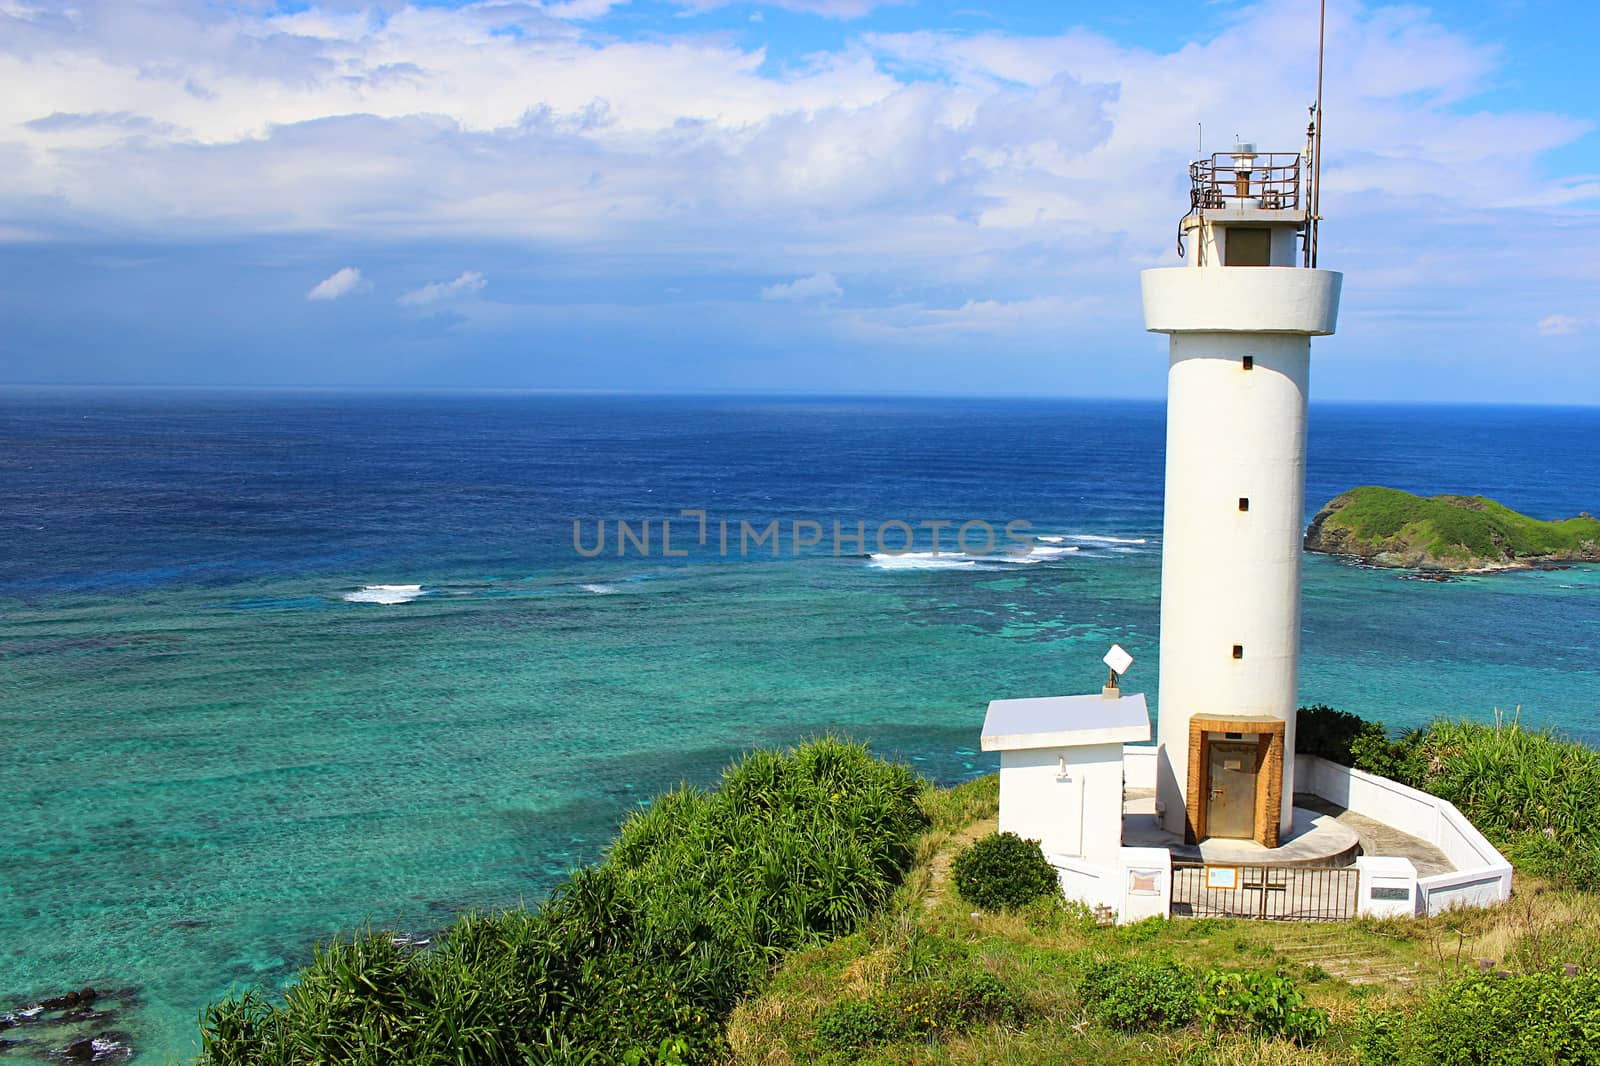 View of the ocean and lighthouse with beautiful blue/green water.